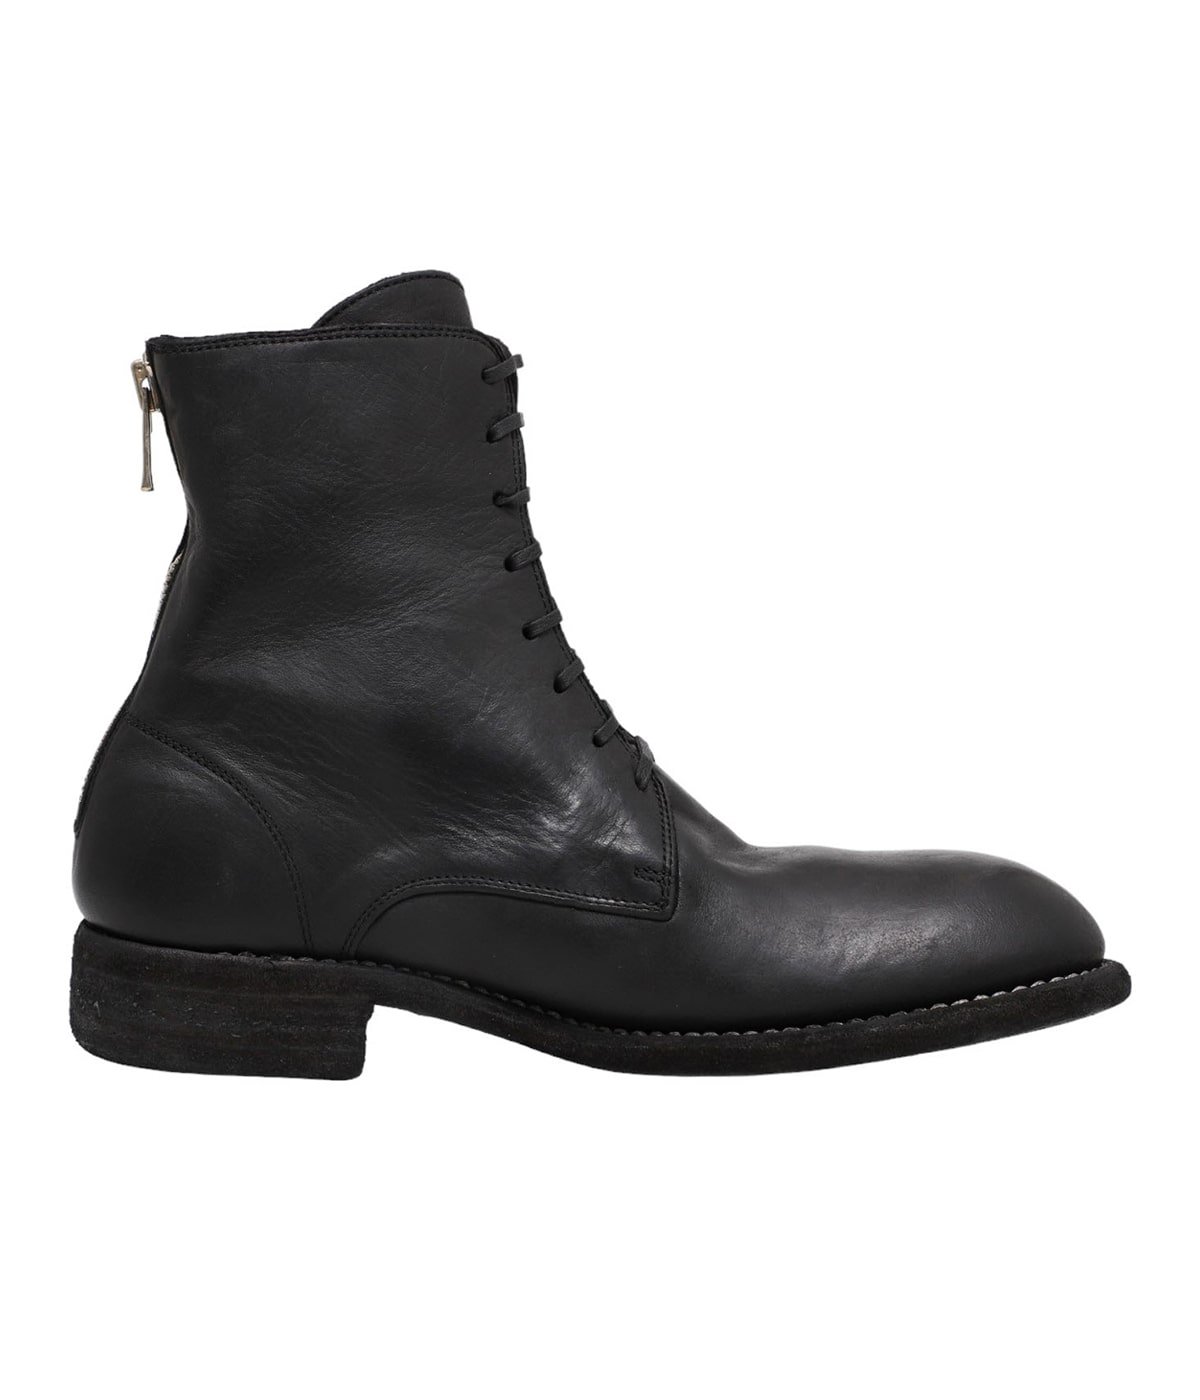 LACED UP AND BACK ZIP BOOTS | GUIDI(グイディ) / シューズ レザー 